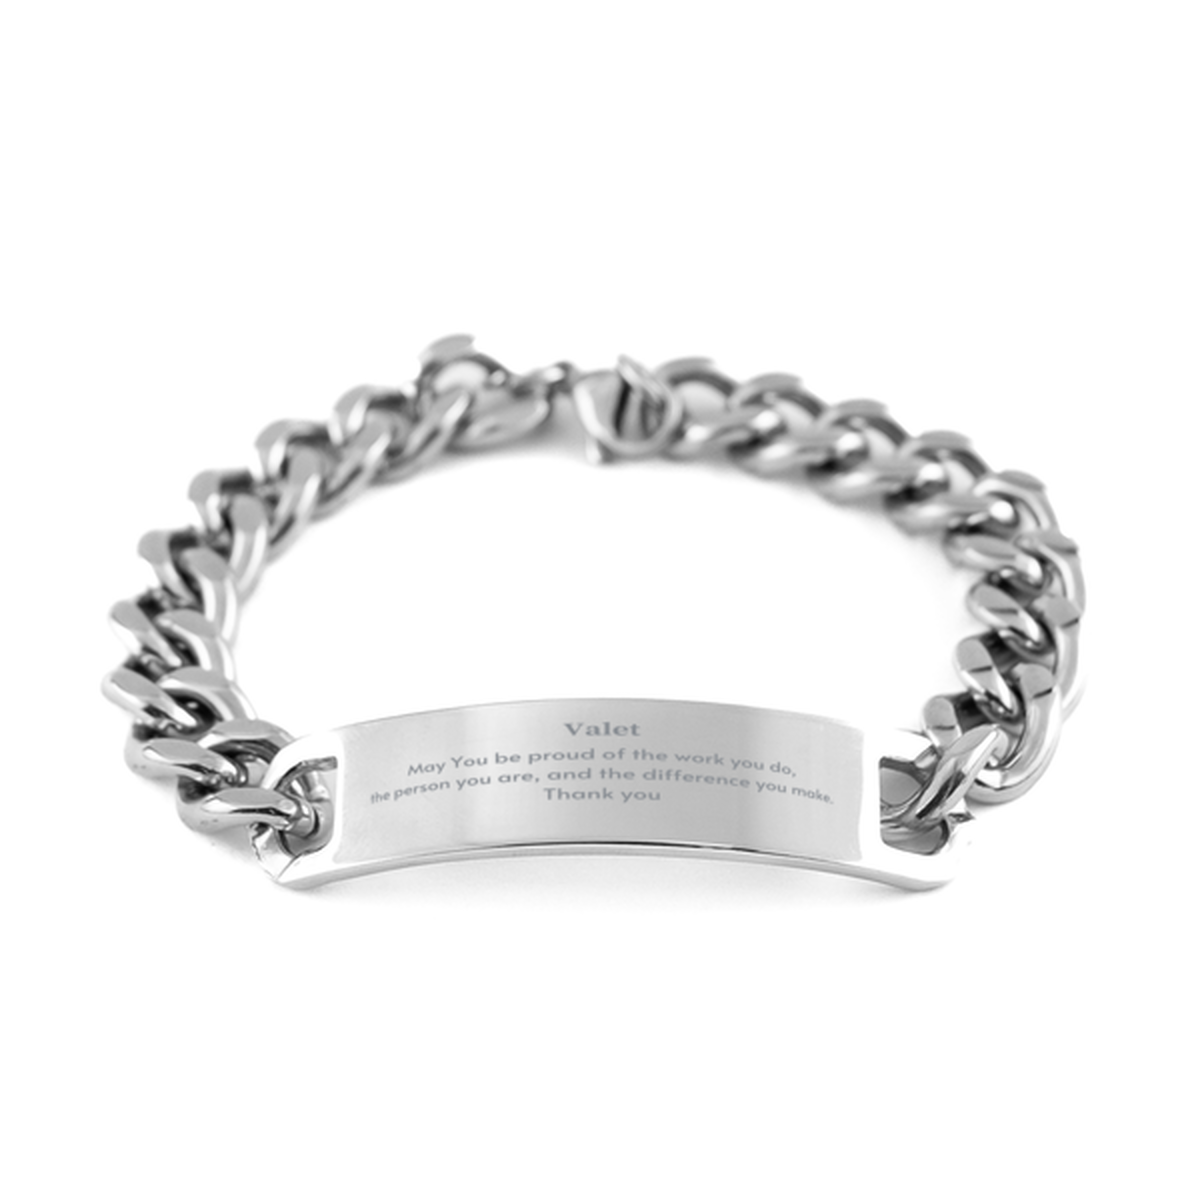 Heartwarming Cuban Chain Stainless Steel Bracelet Retirement Coworkers Gifts for Valet, Valet May You be proud of the work you do, the person you are Gifts for Boss Men Women Friends